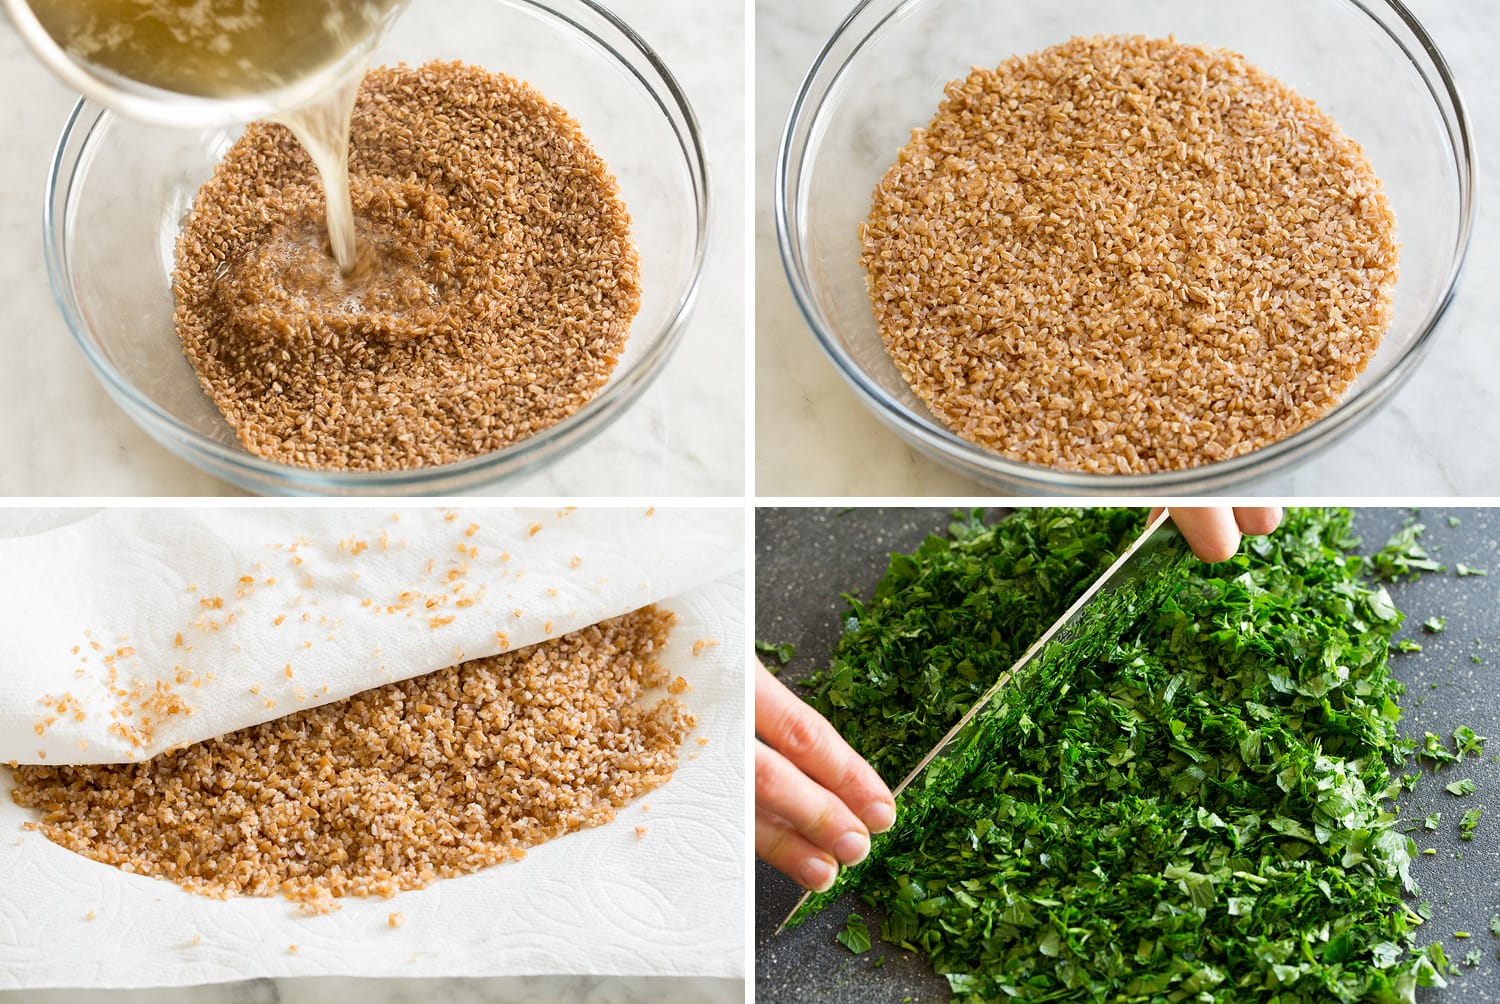 Steps of making tabbouleh and dressing.